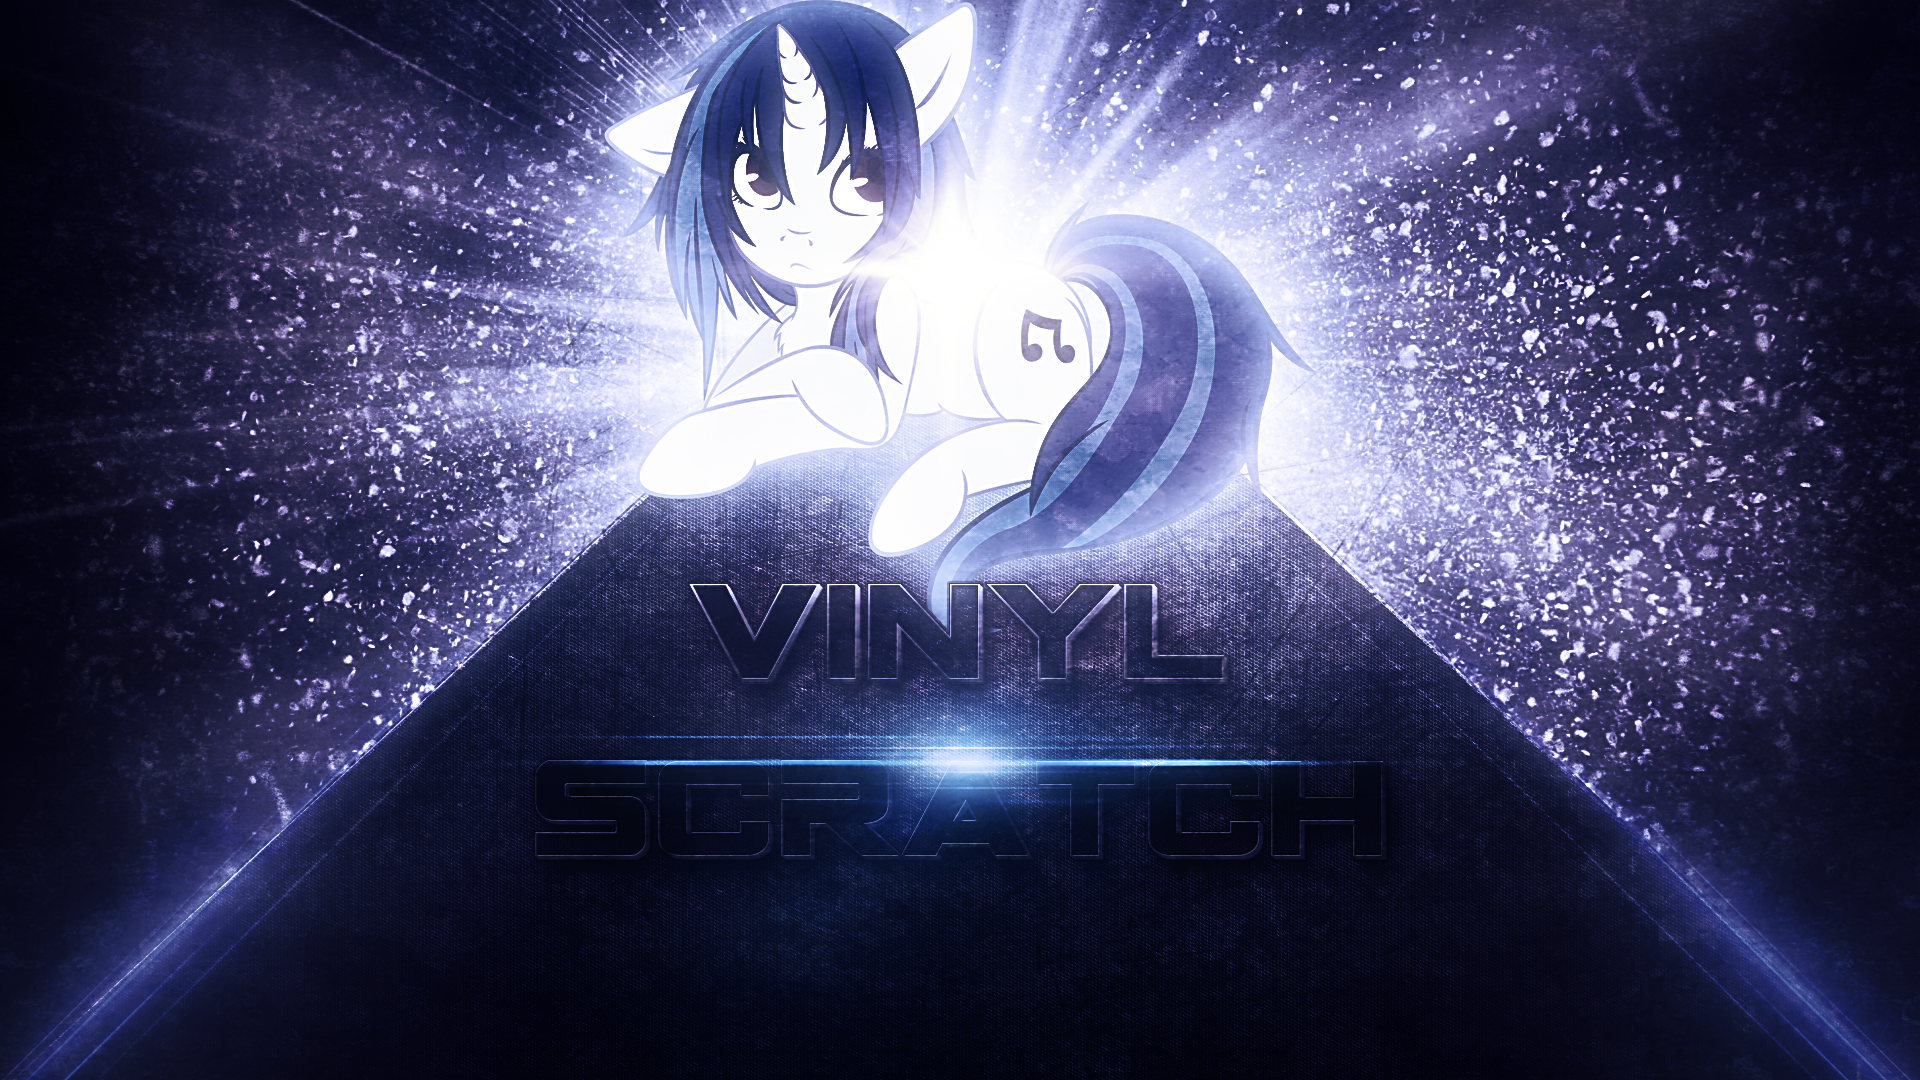 Vinyl is Relaxing - Wallpaper by notsoclassy, Shelmo69 and Tzolkine